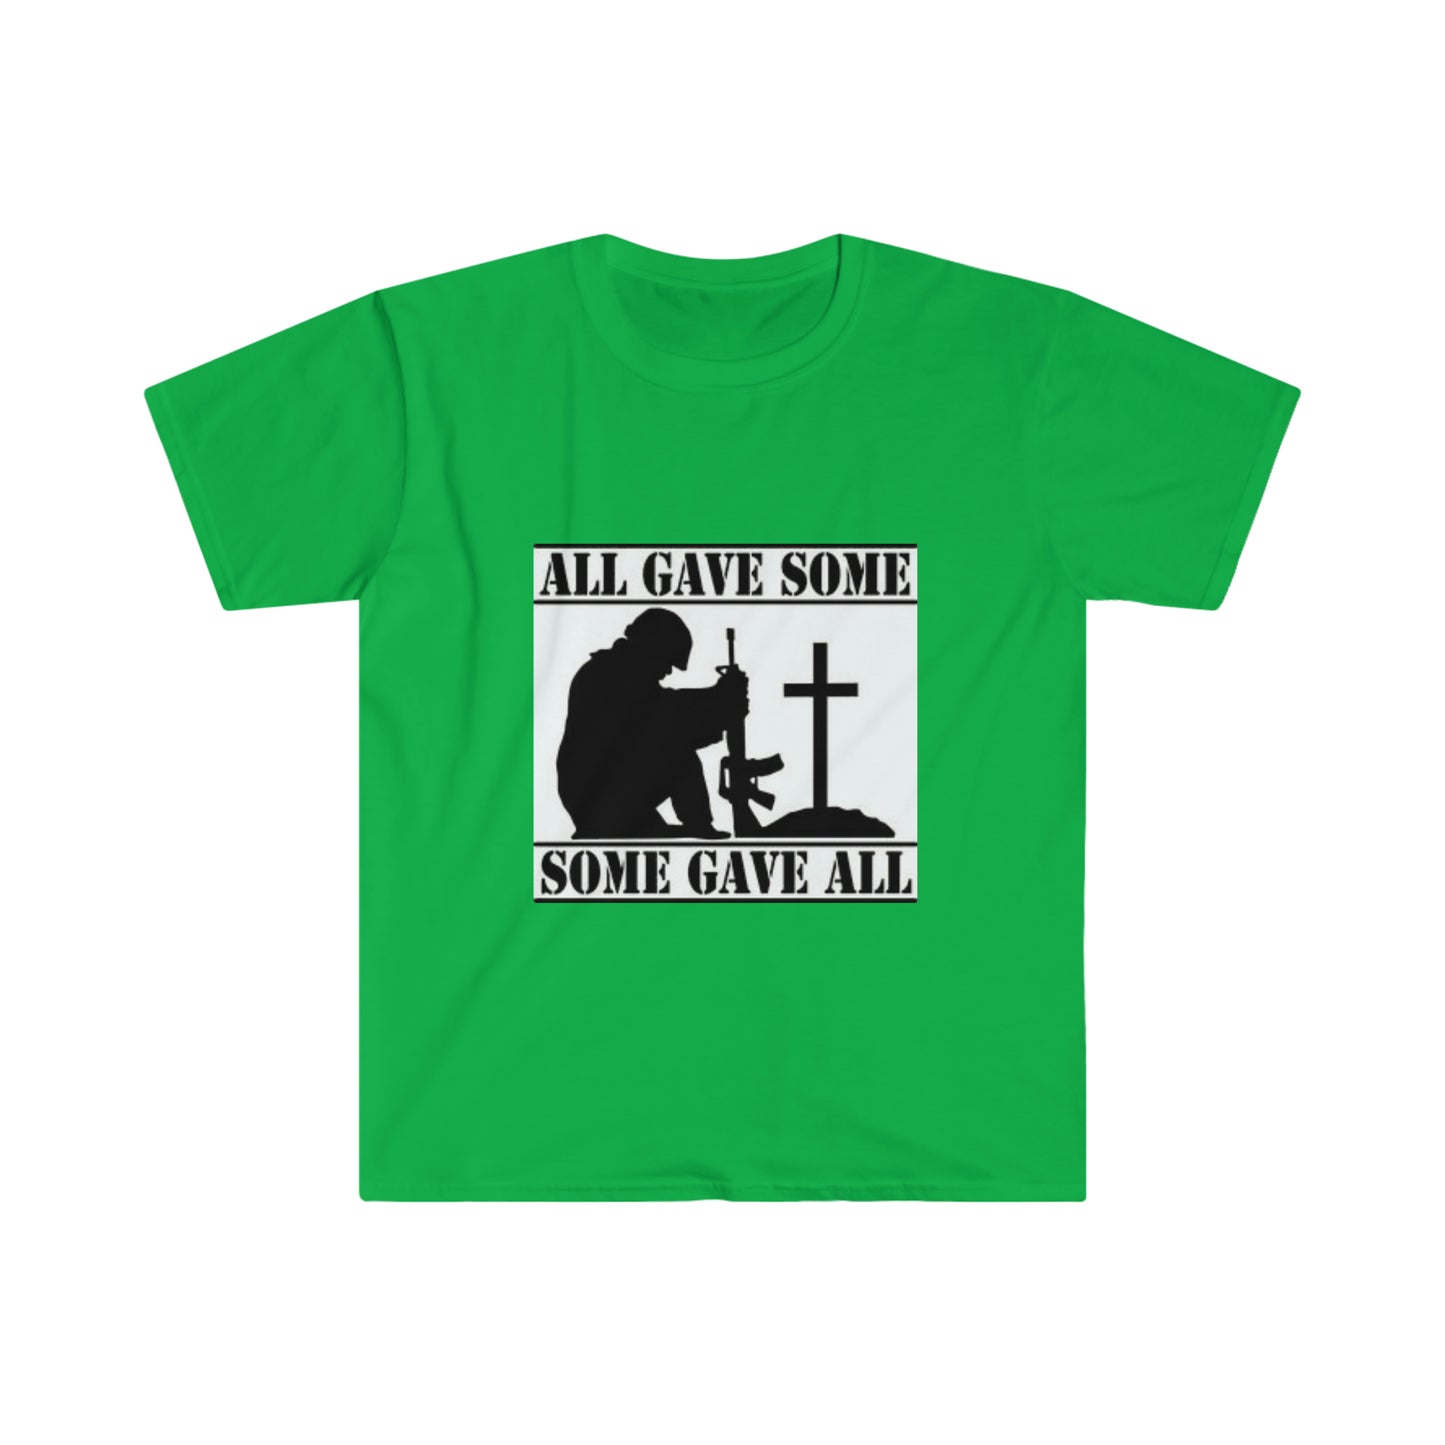 All Gave Some, Some Gave All T-Shirt